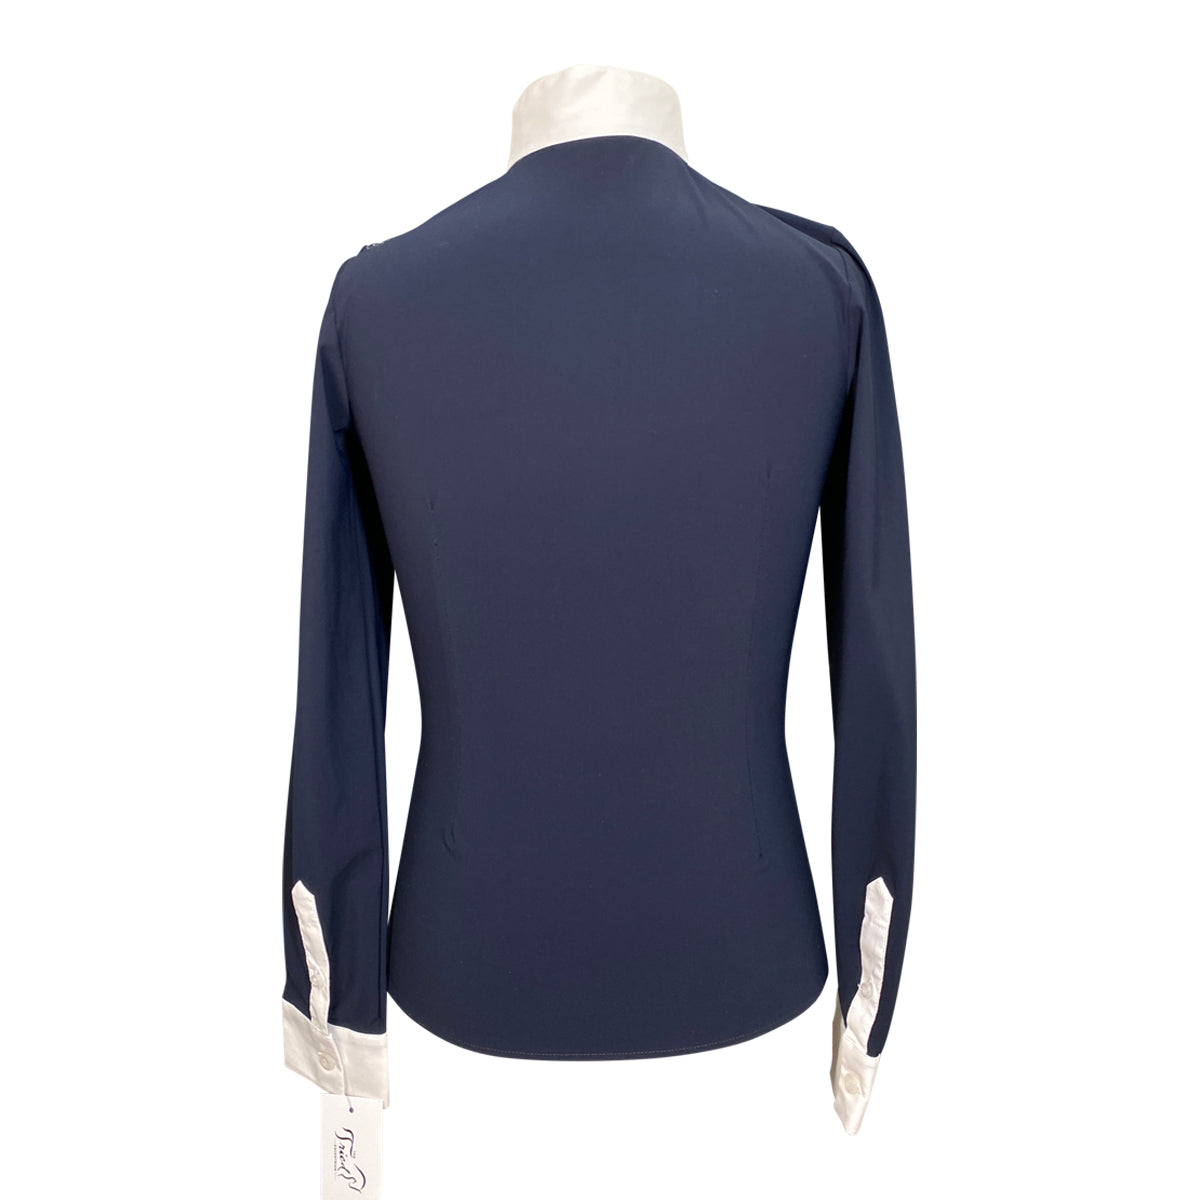 Cavalleria Toscana Long Sleeve Competition Shirt in Navy